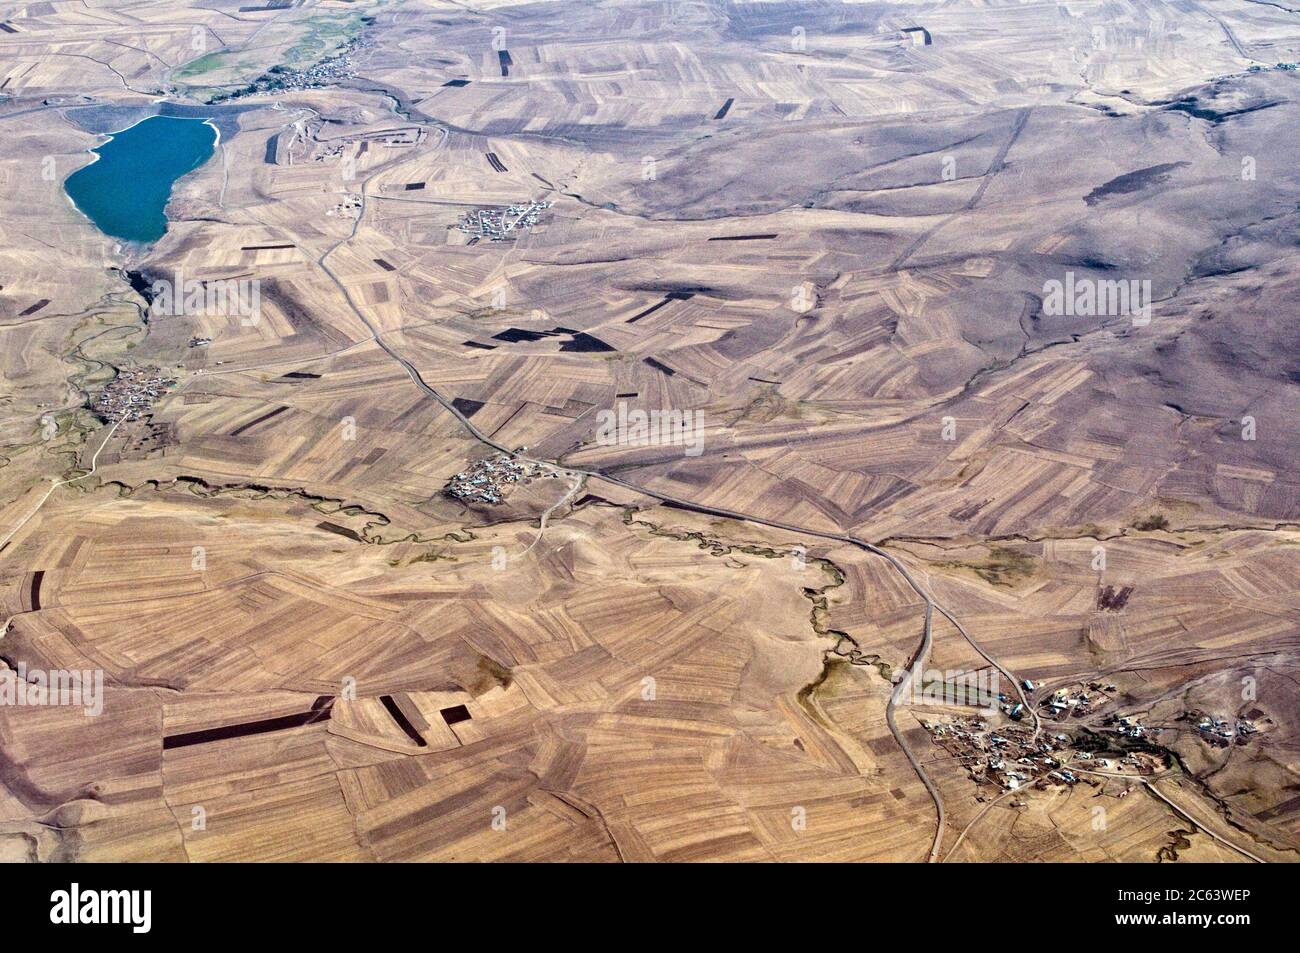 Aerial view of farmland on the Turkish steppes near the city of Kars and the Armenia border in the eastern Anatolia region of northeastern Turkey. Stock Photo